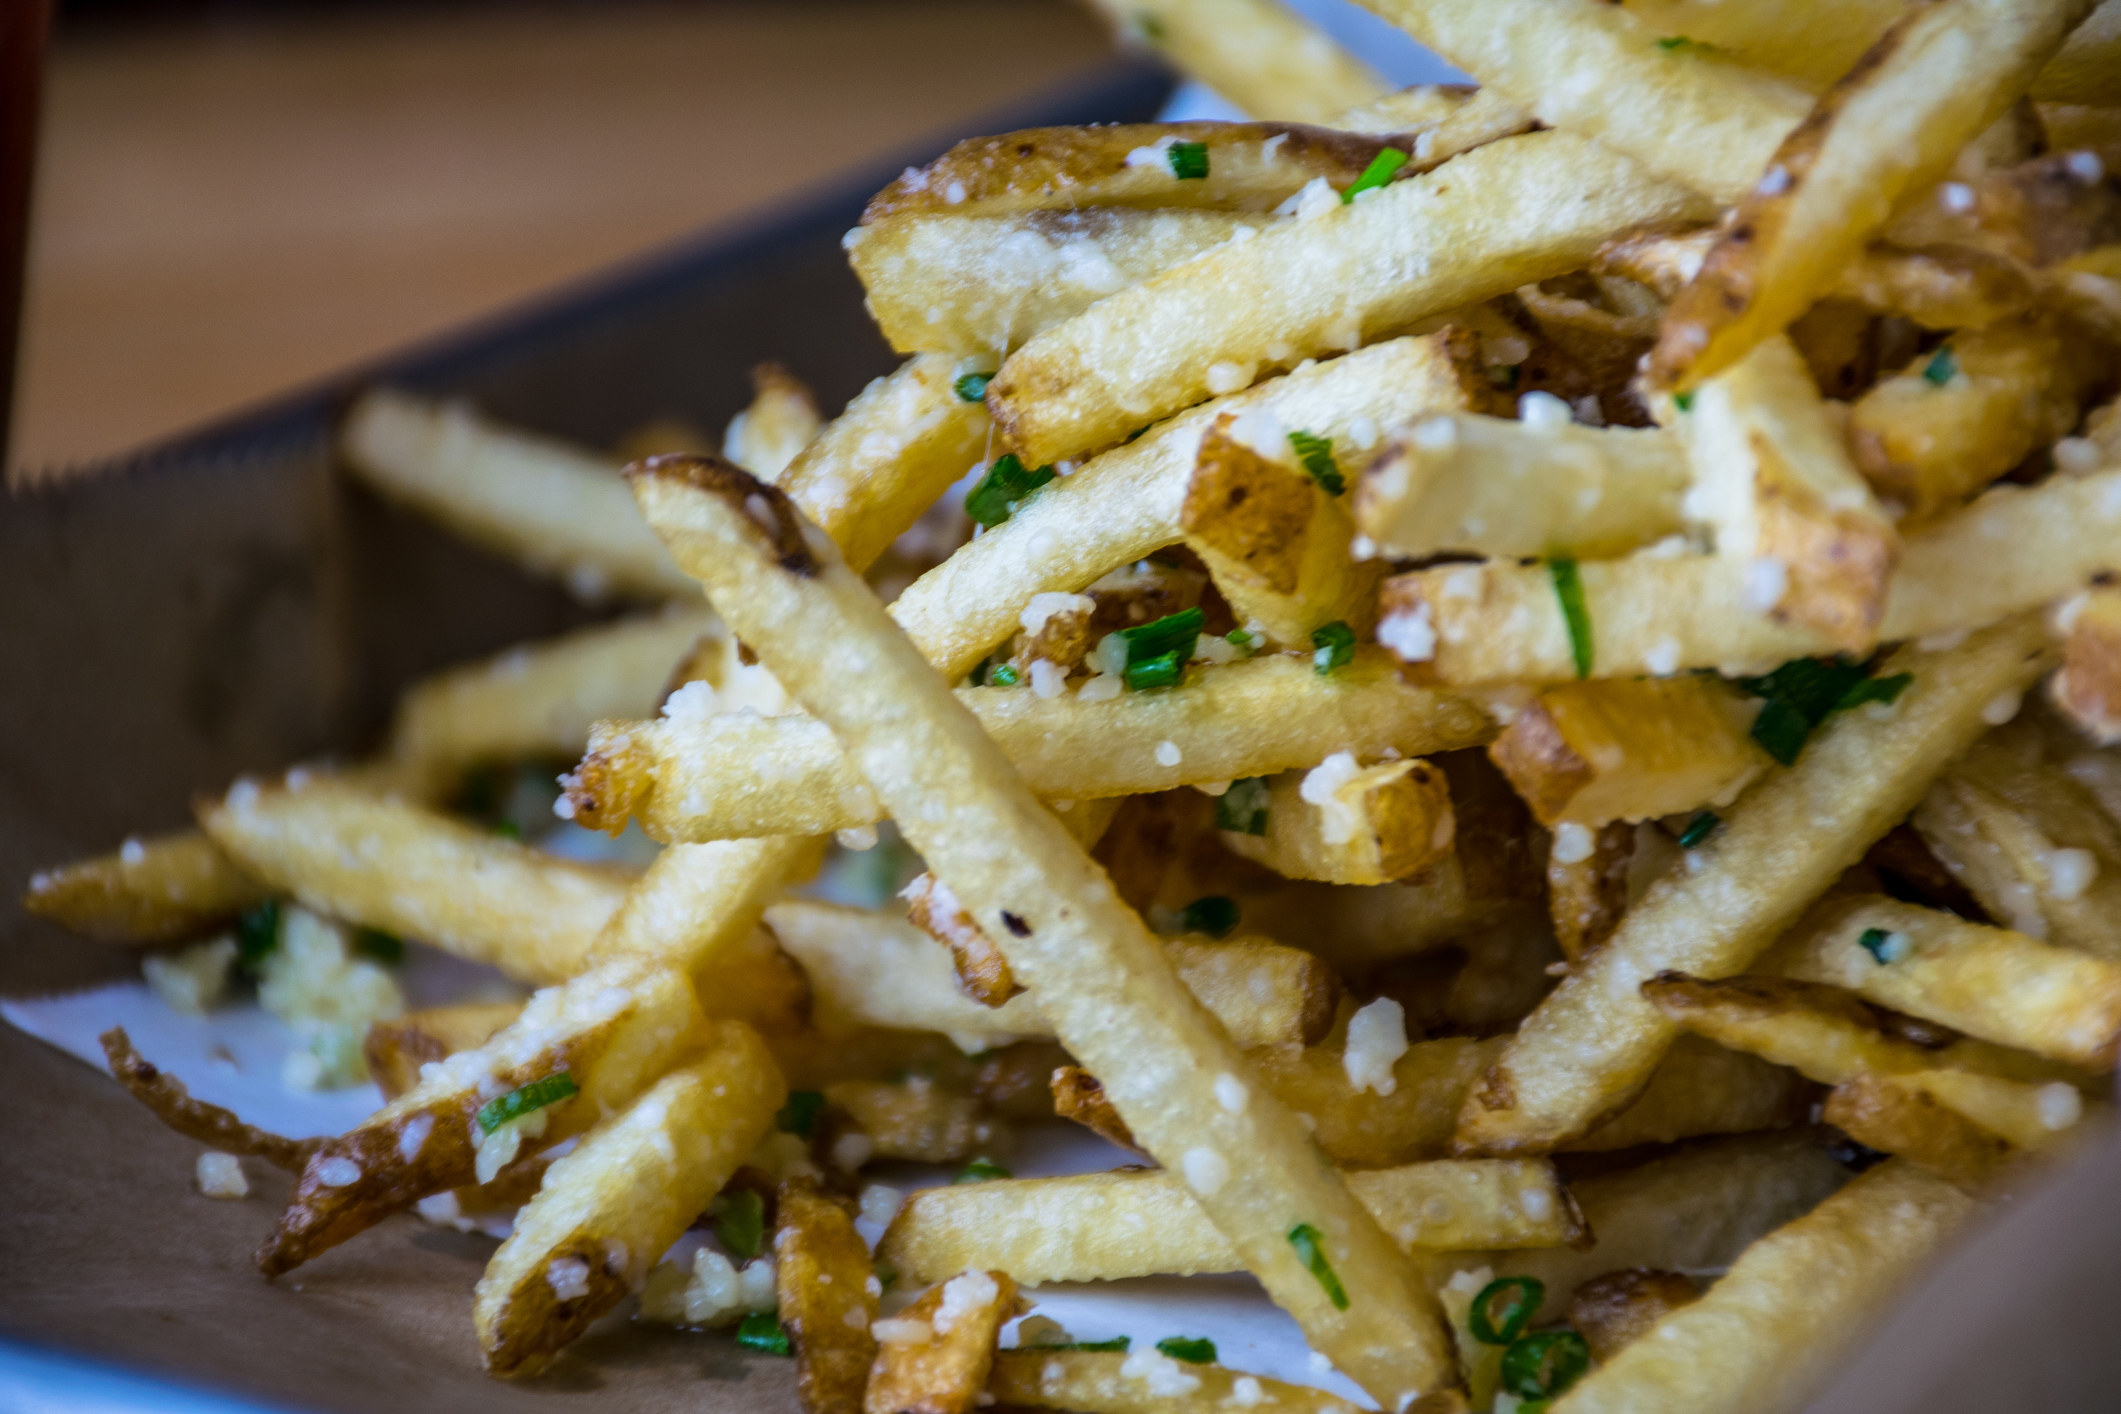 Truffle French fries.